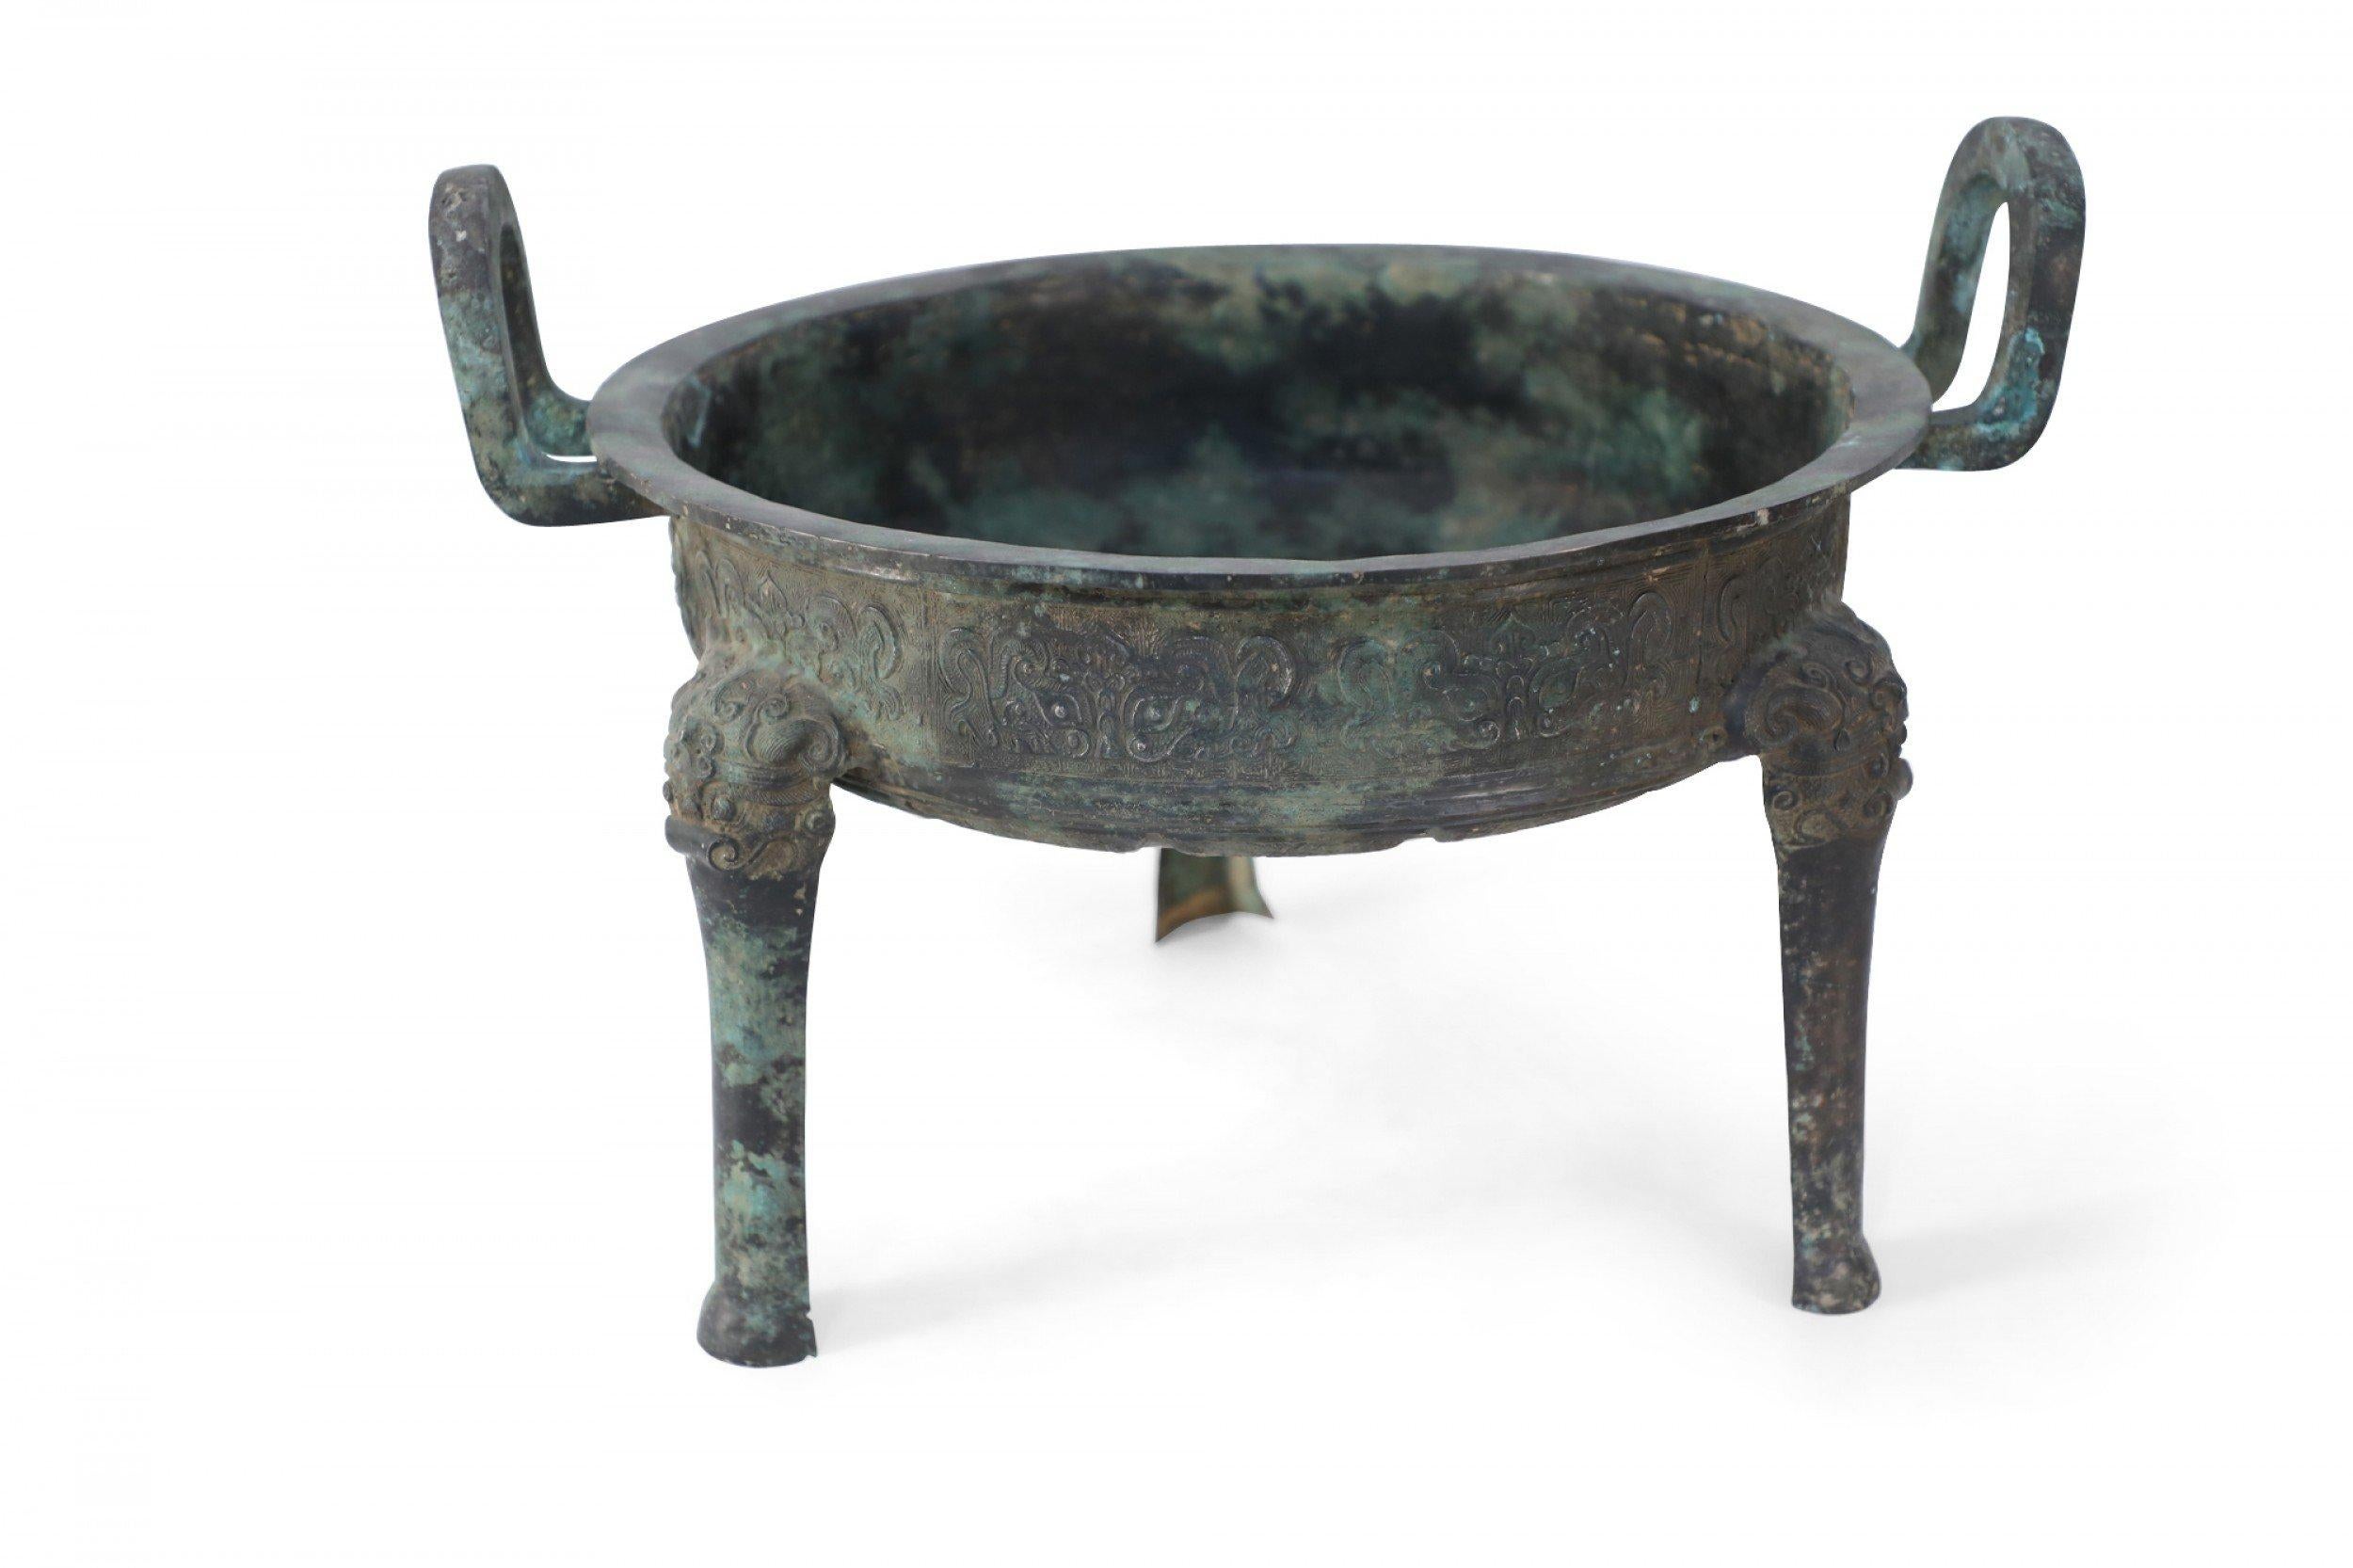 Etched Antique Chinese Han Dynasty-Style Patinated Bronze Pot